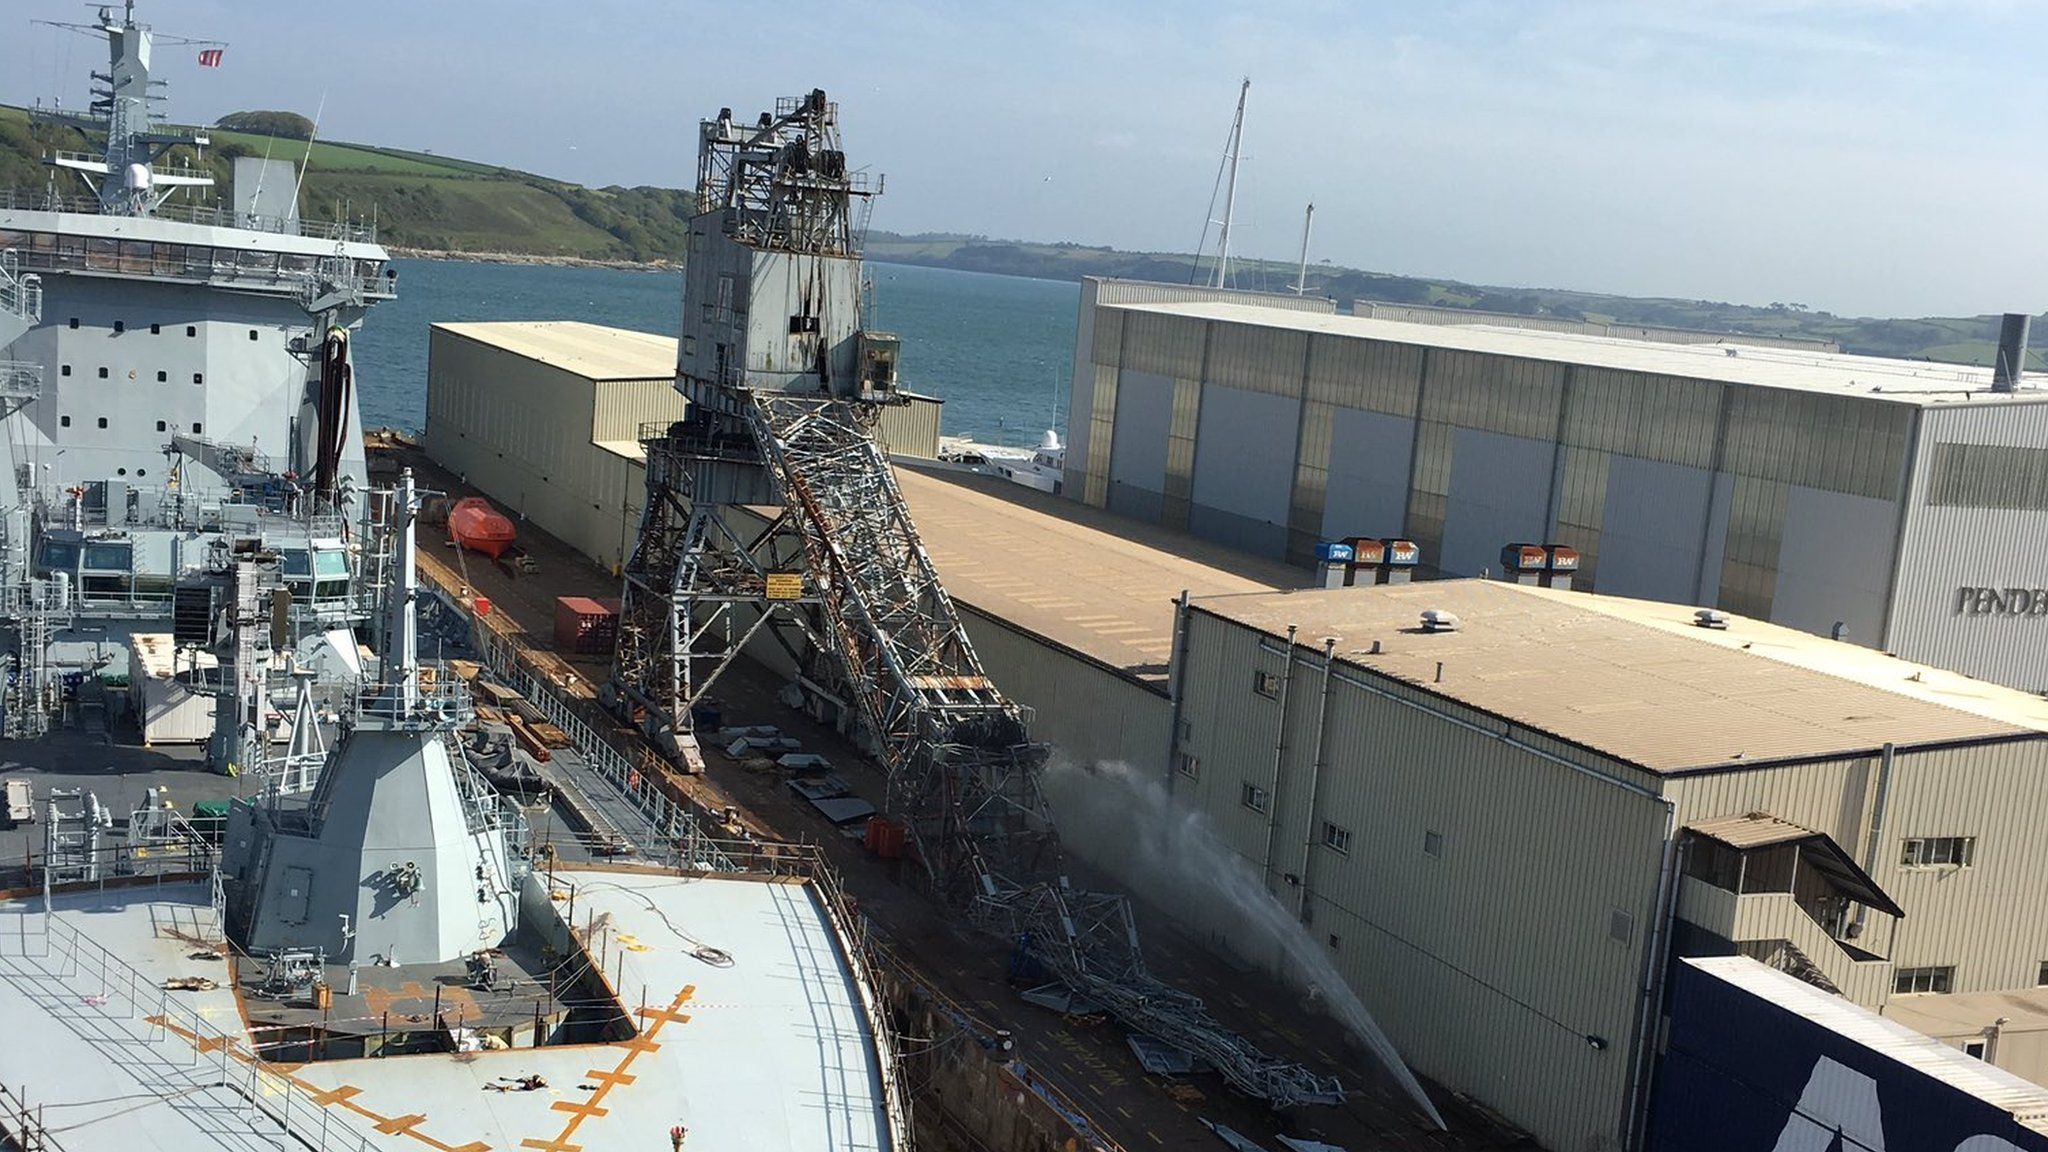 Crane collapsed at Falmouth Docks